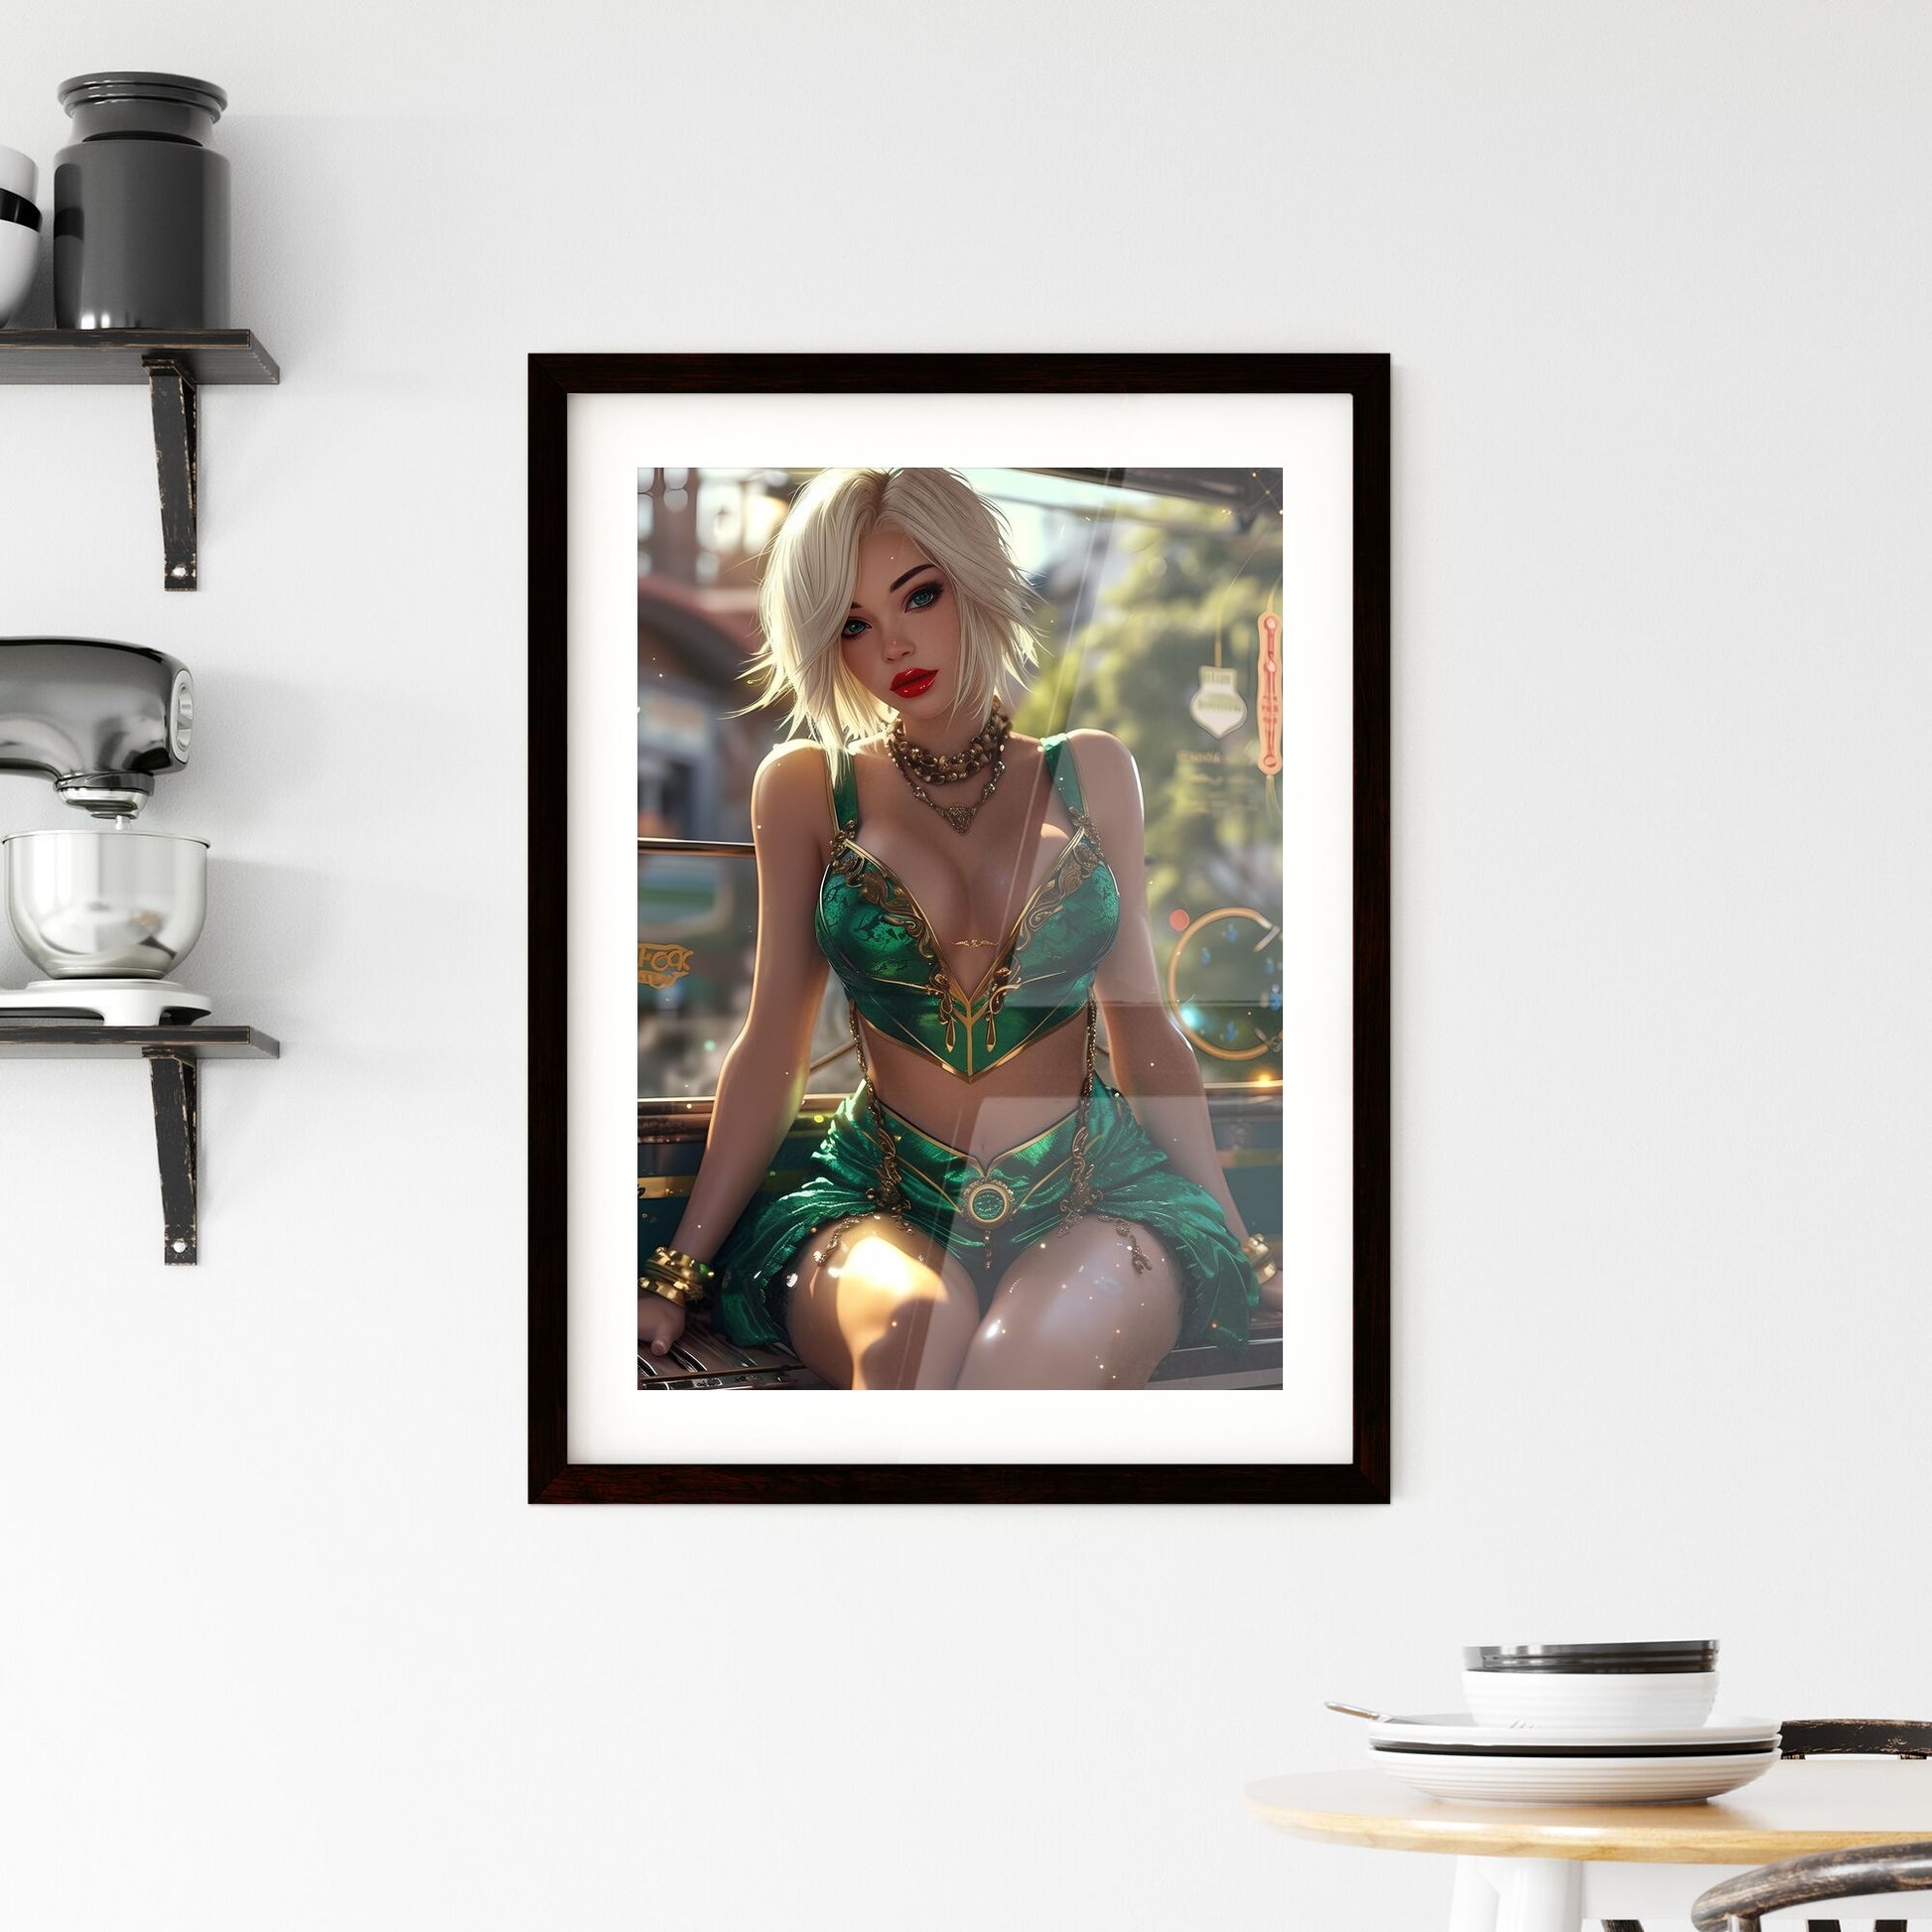 1950's pin up, has blond hair, red lipstick - Art print of a woman sitting in a vehicle Default Title